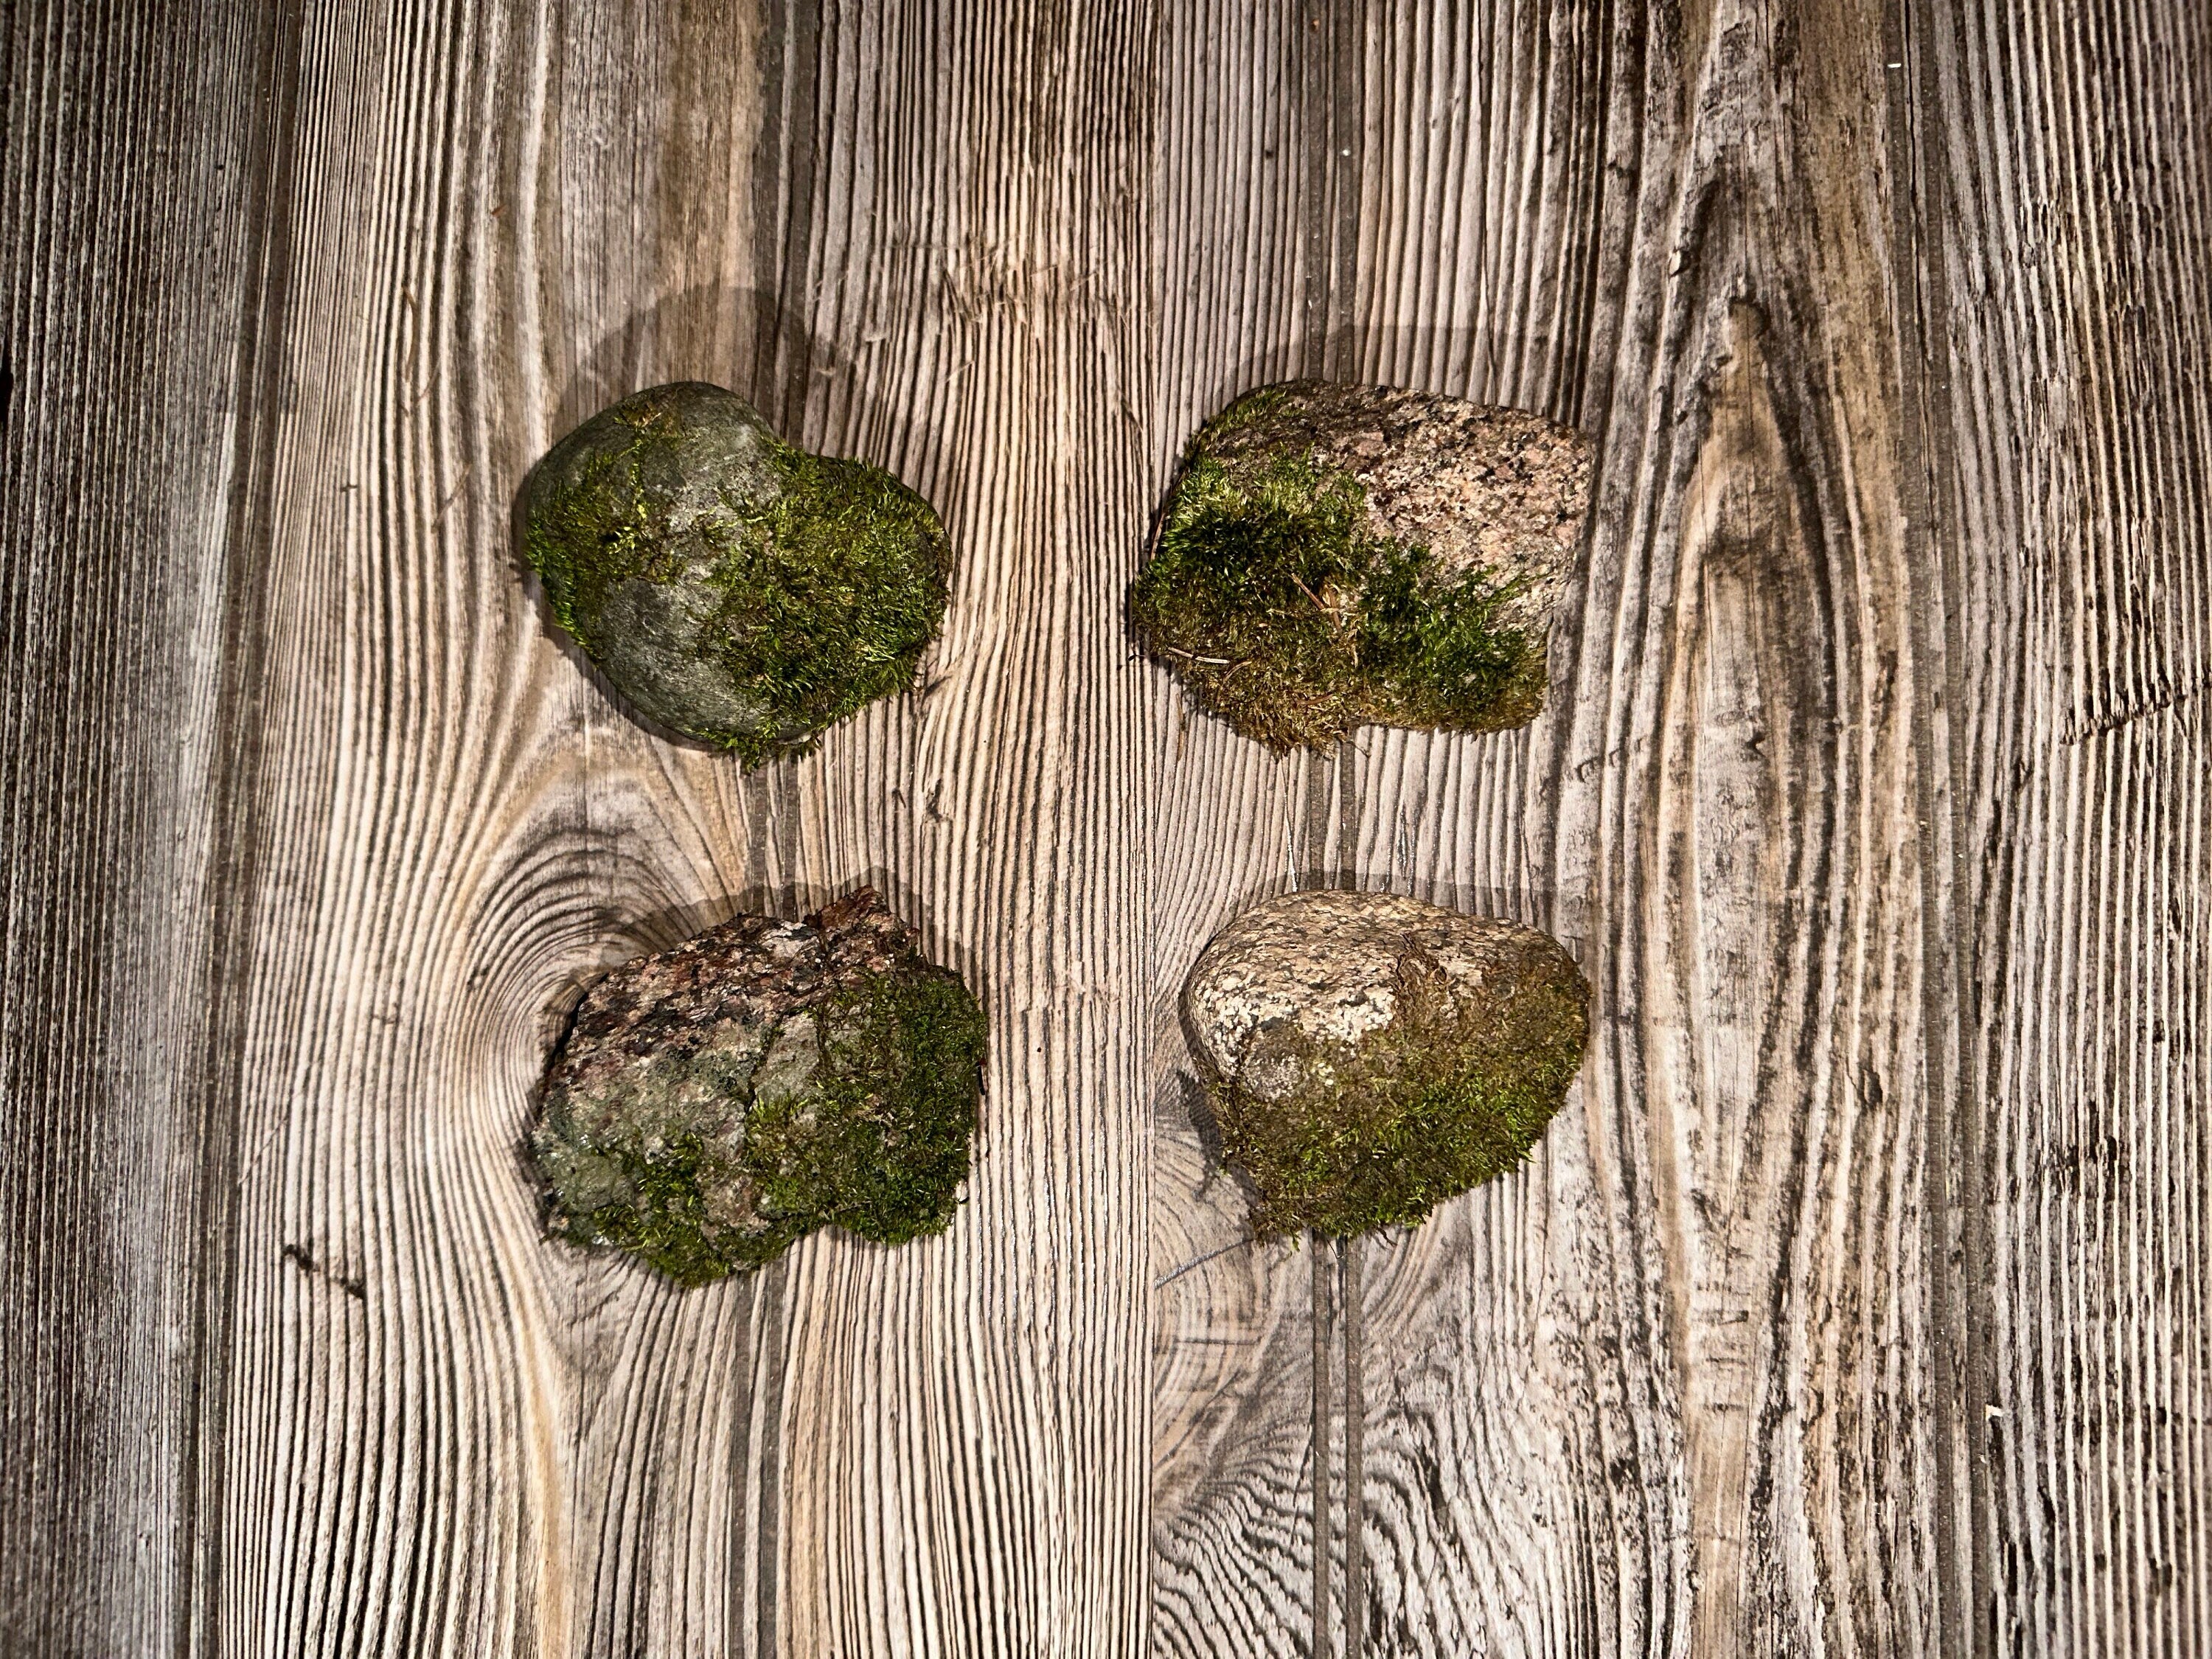 Four Mossy Rocks, Live Moss Covered Stones, About 2-3 Inches in Size